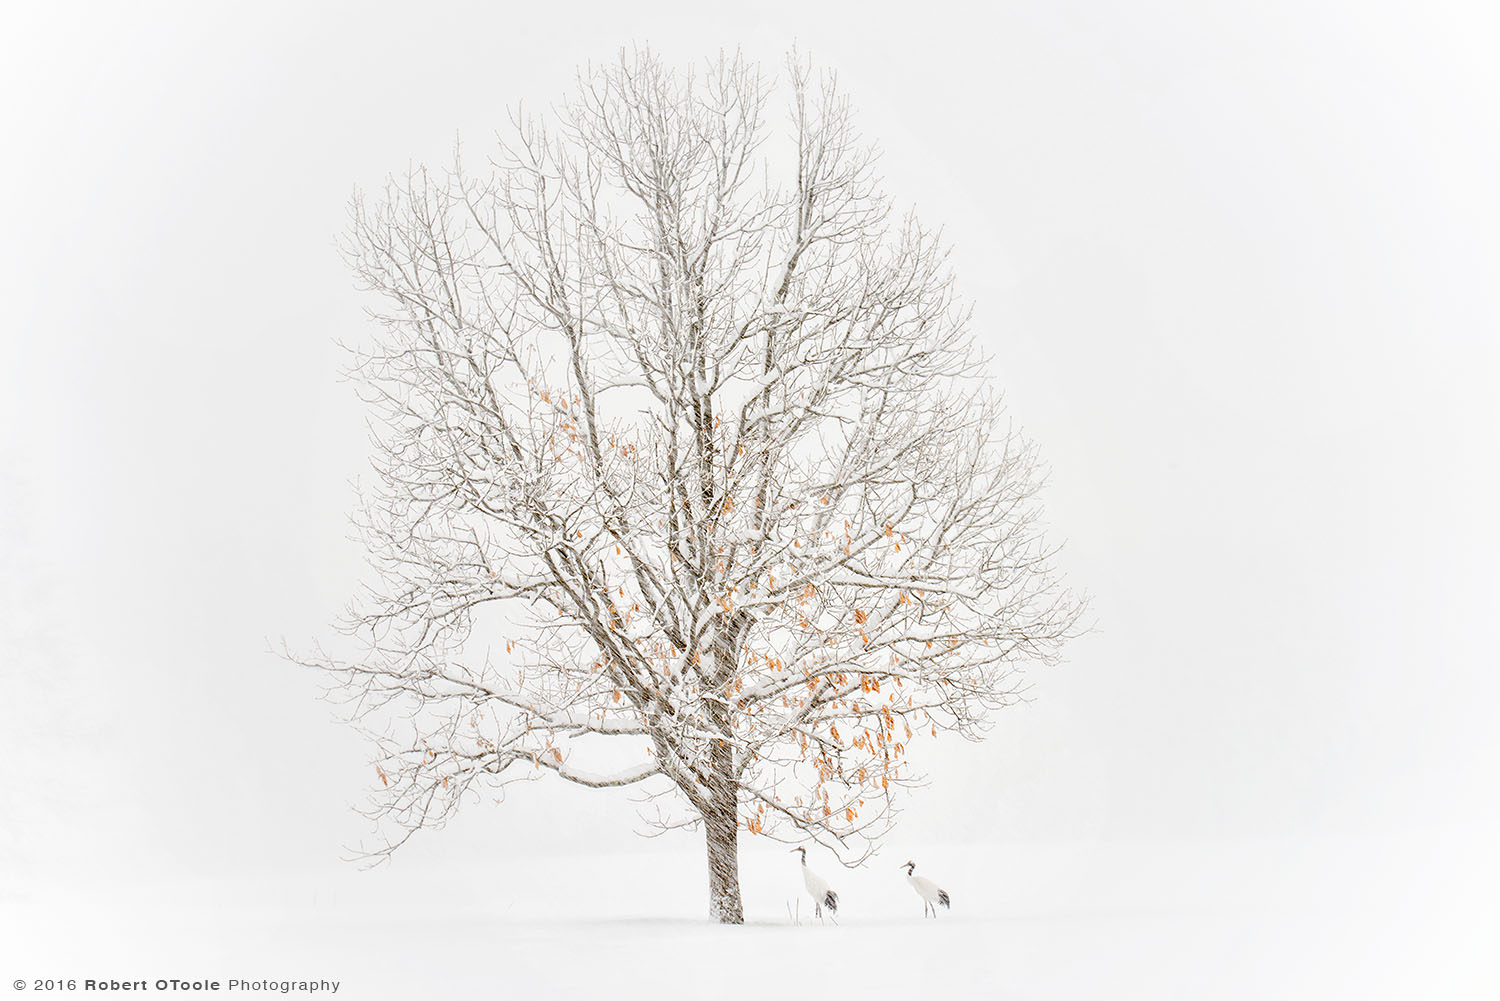 Pair of Red -crowned Cranes Seek Shelter under the Tree from  the Blizzard